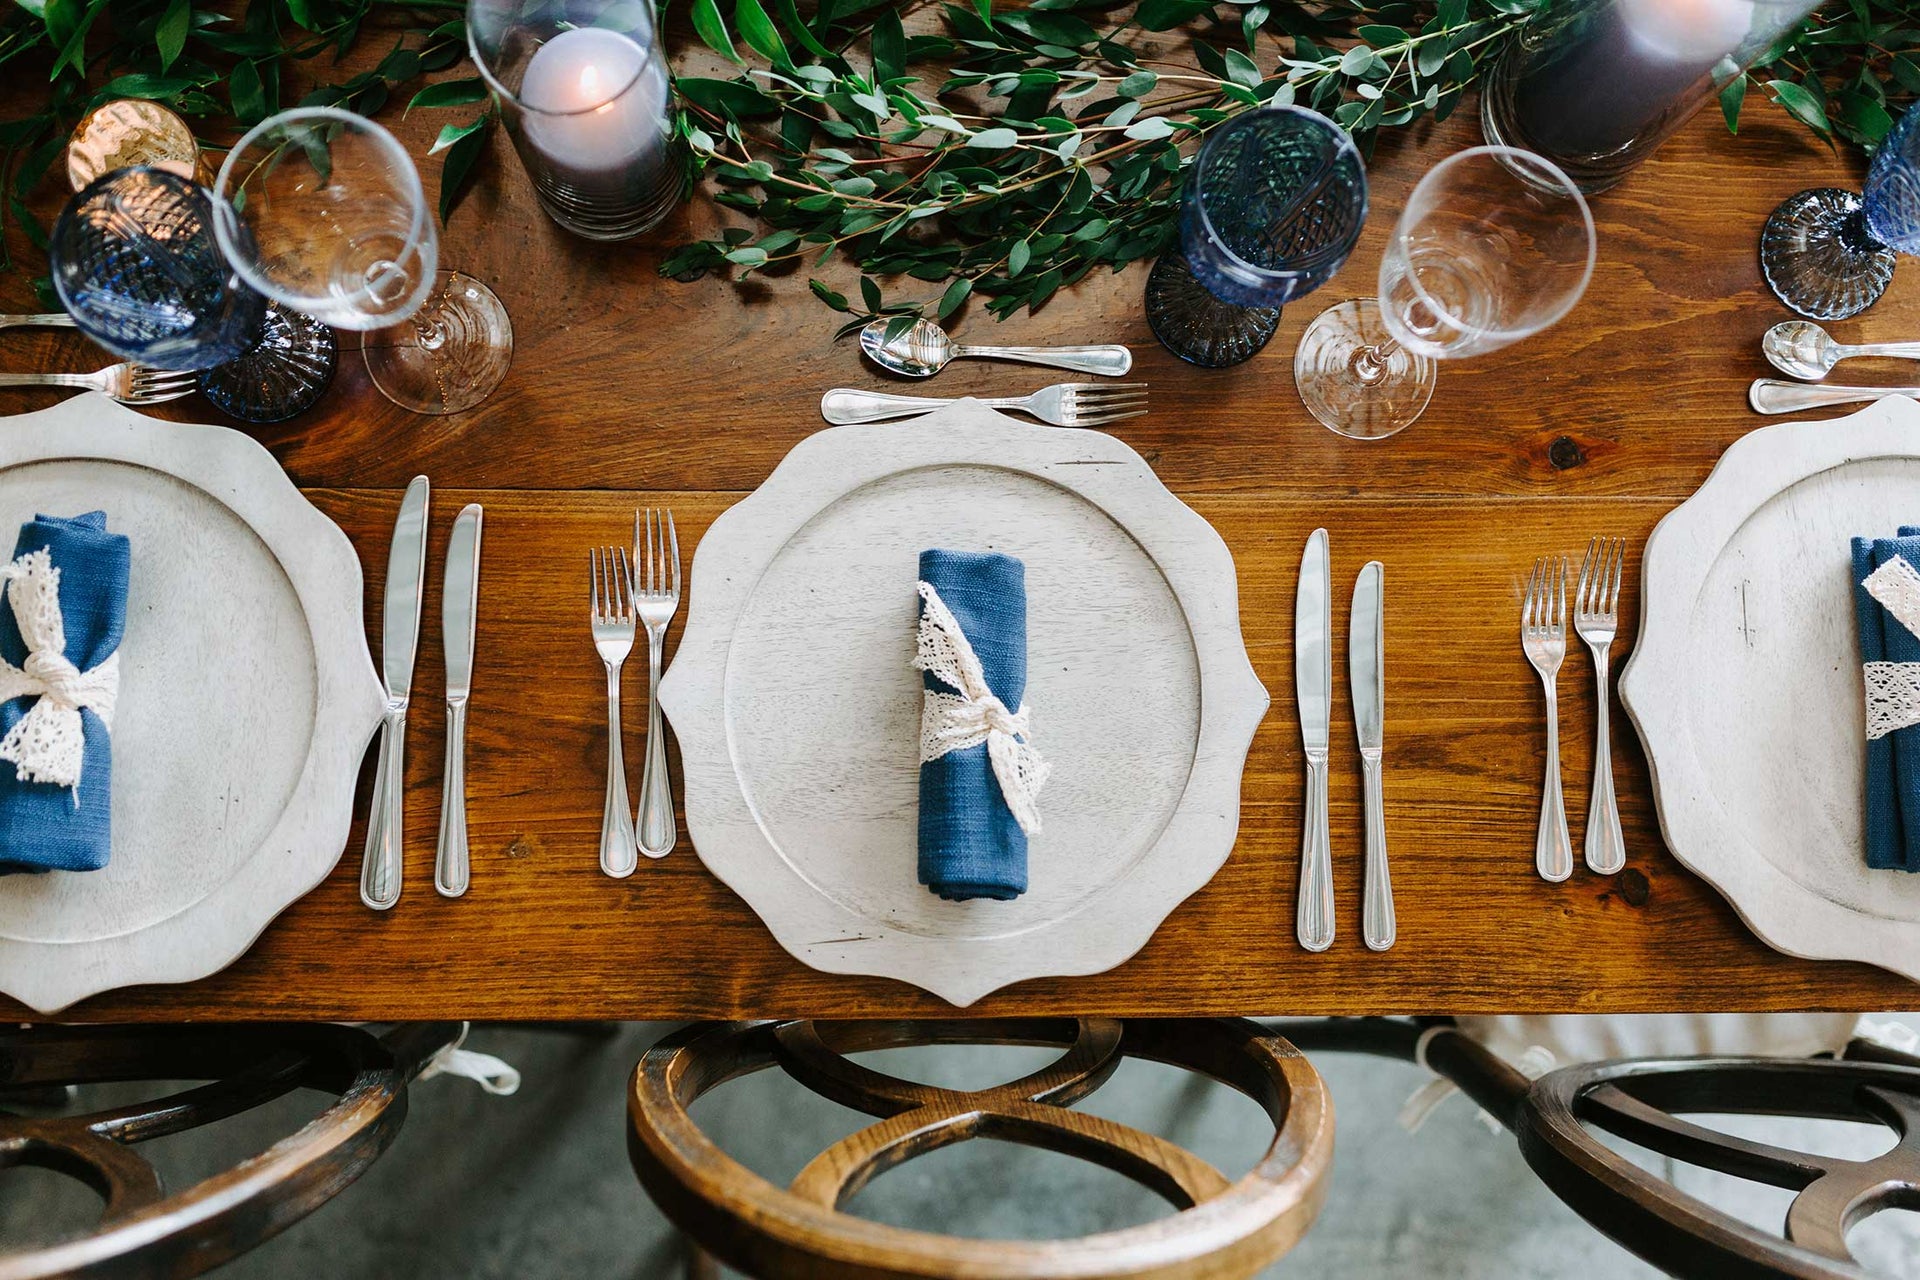 Place setting on a wooden table and blue napkin featuring rental party items.